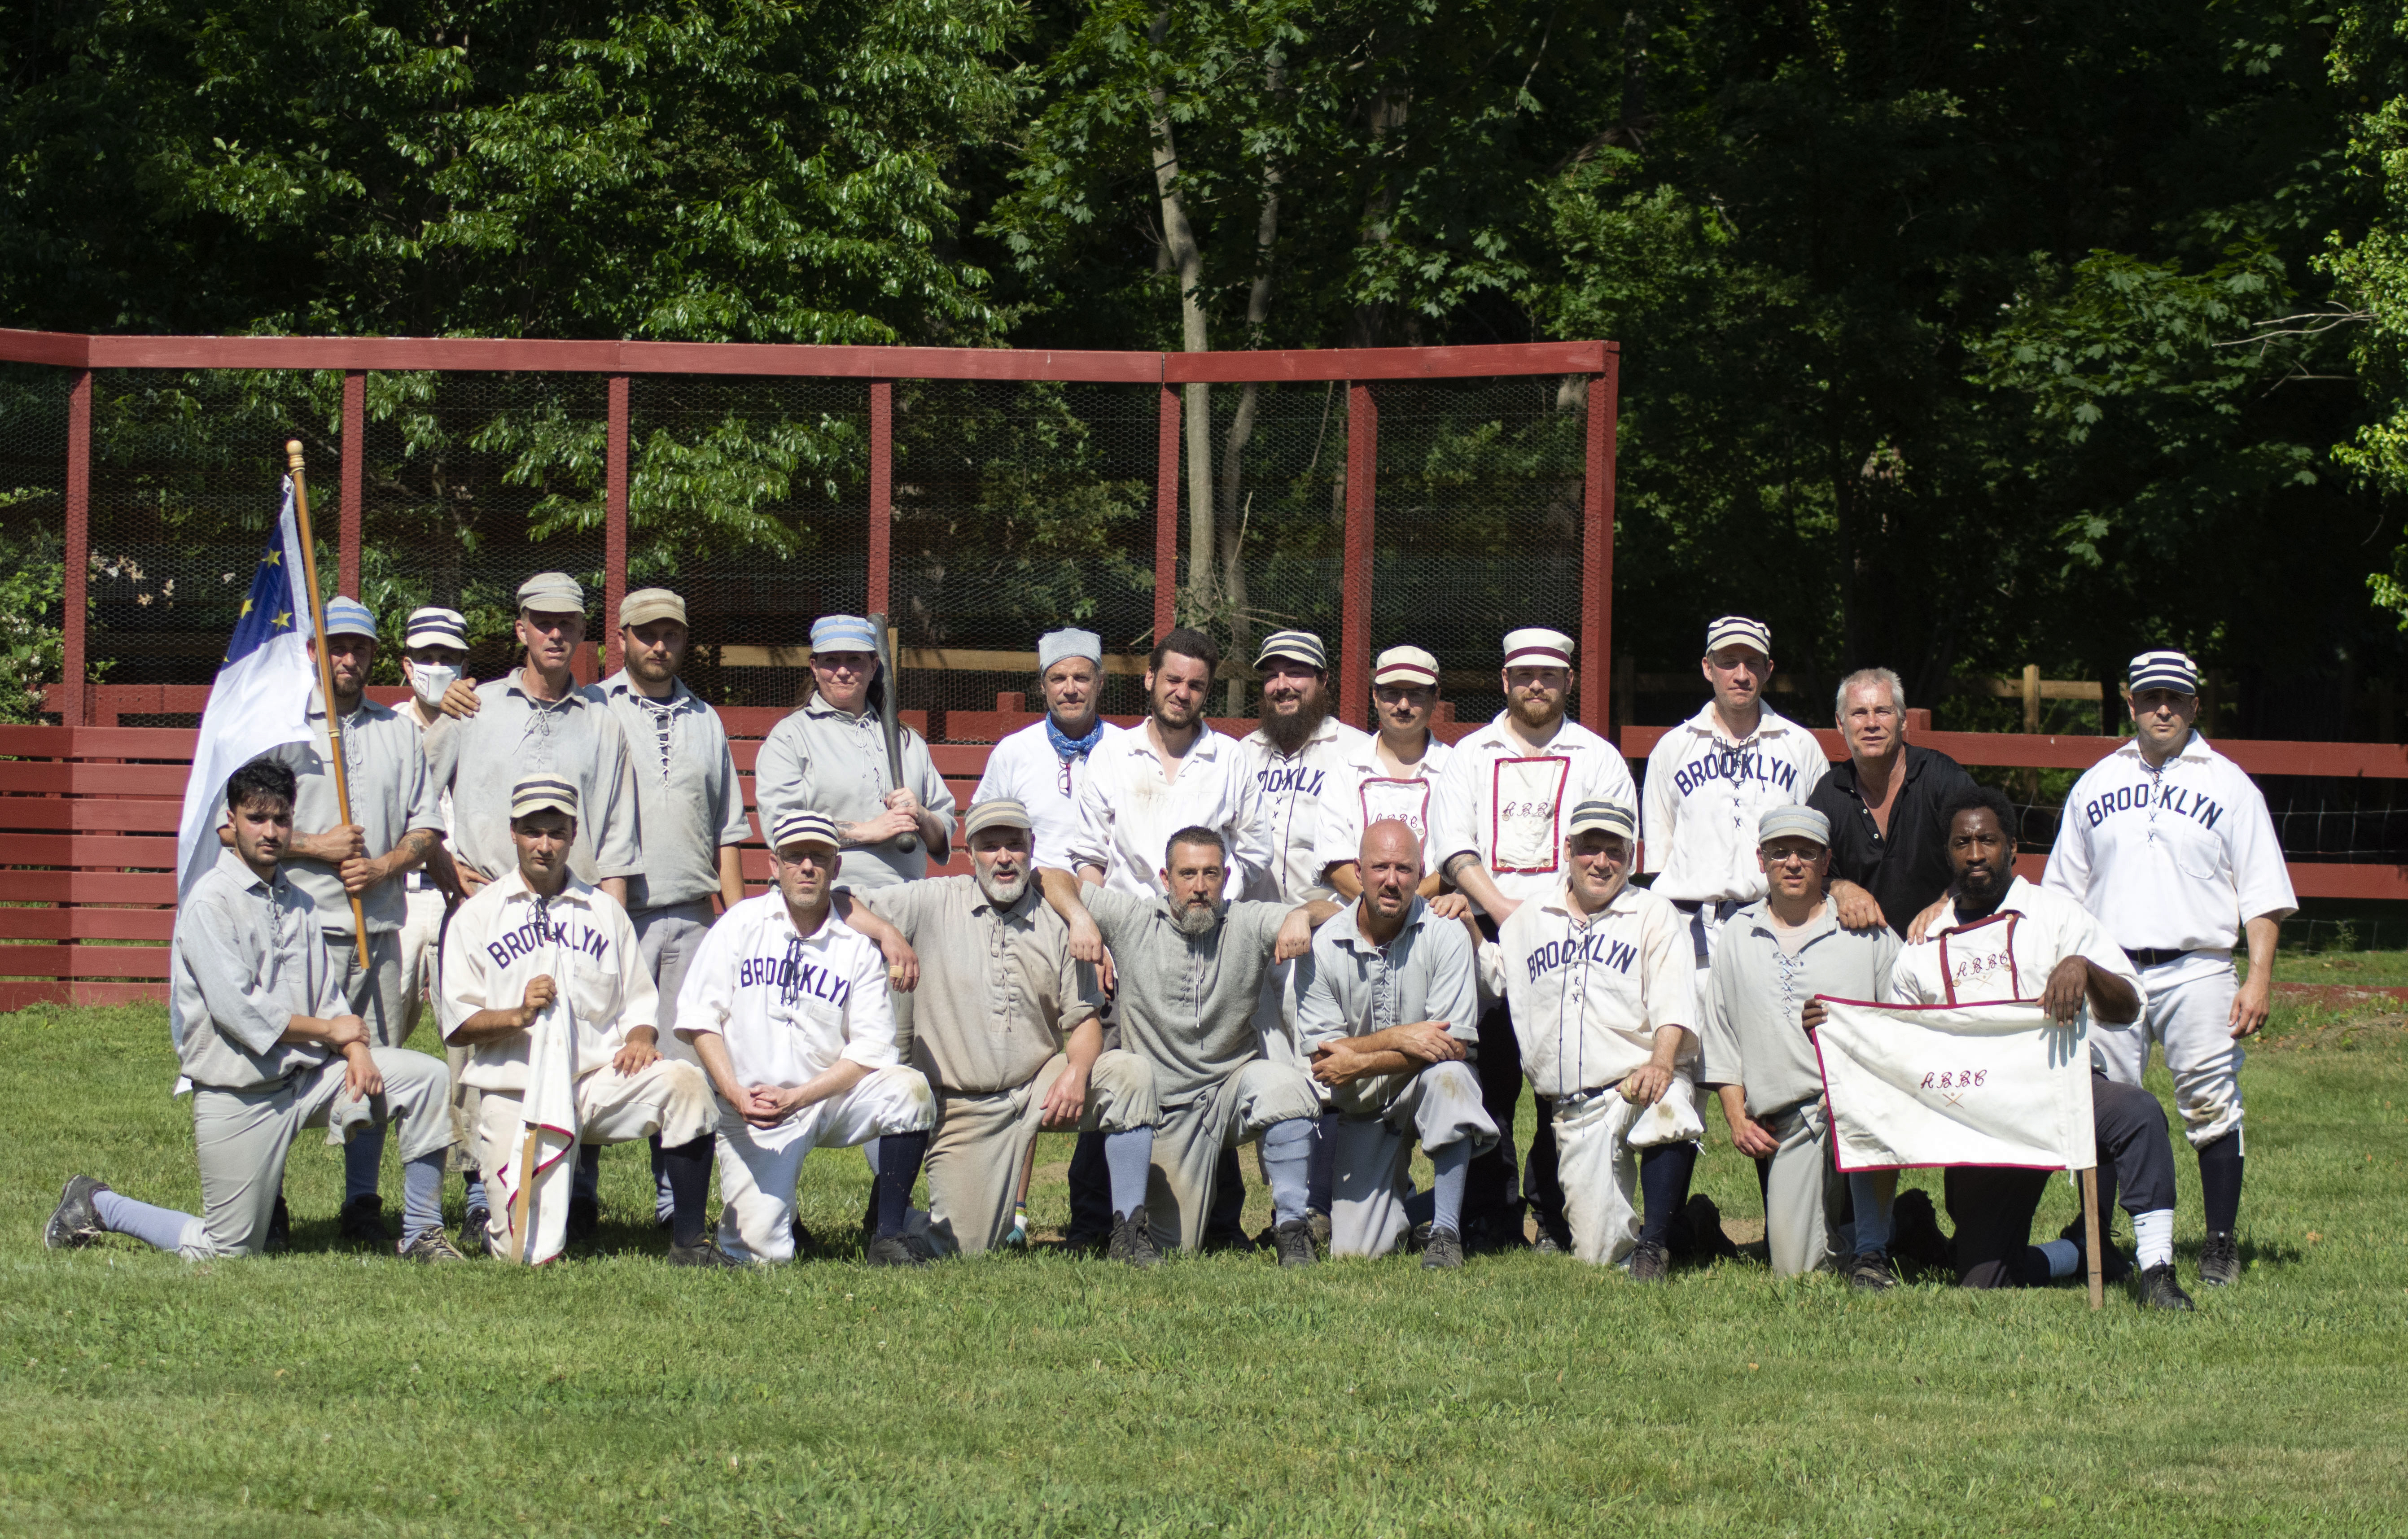 The Atlantics and Grays join arms for a post-game picture at a vintage baseball game